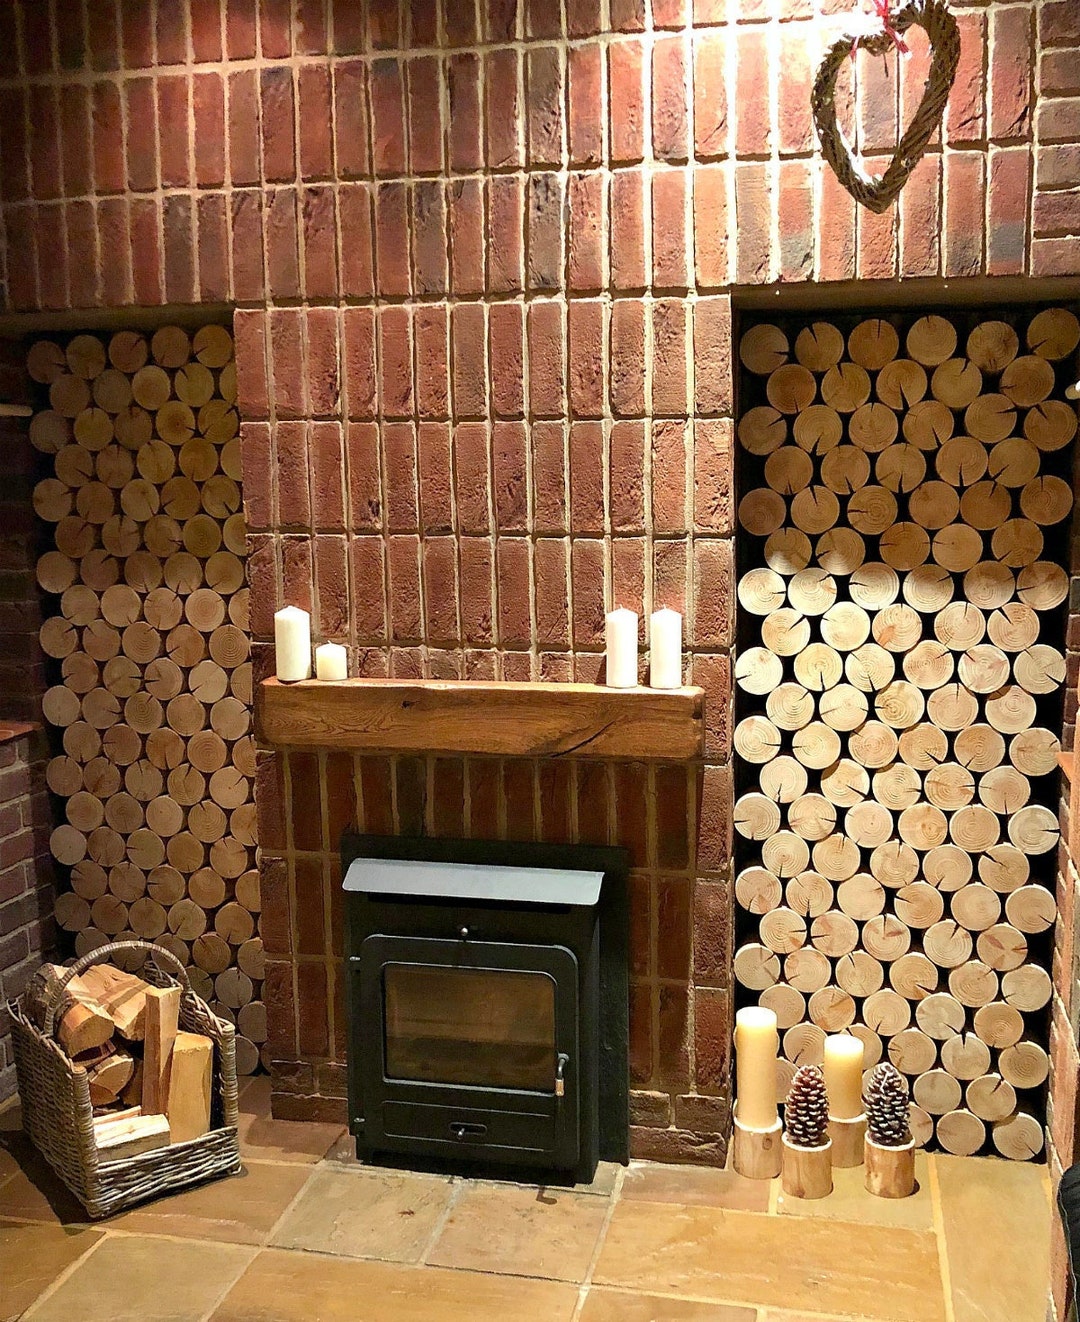 Decorative Logs For Fireplaces & Alcoves - The Original UK Supplier